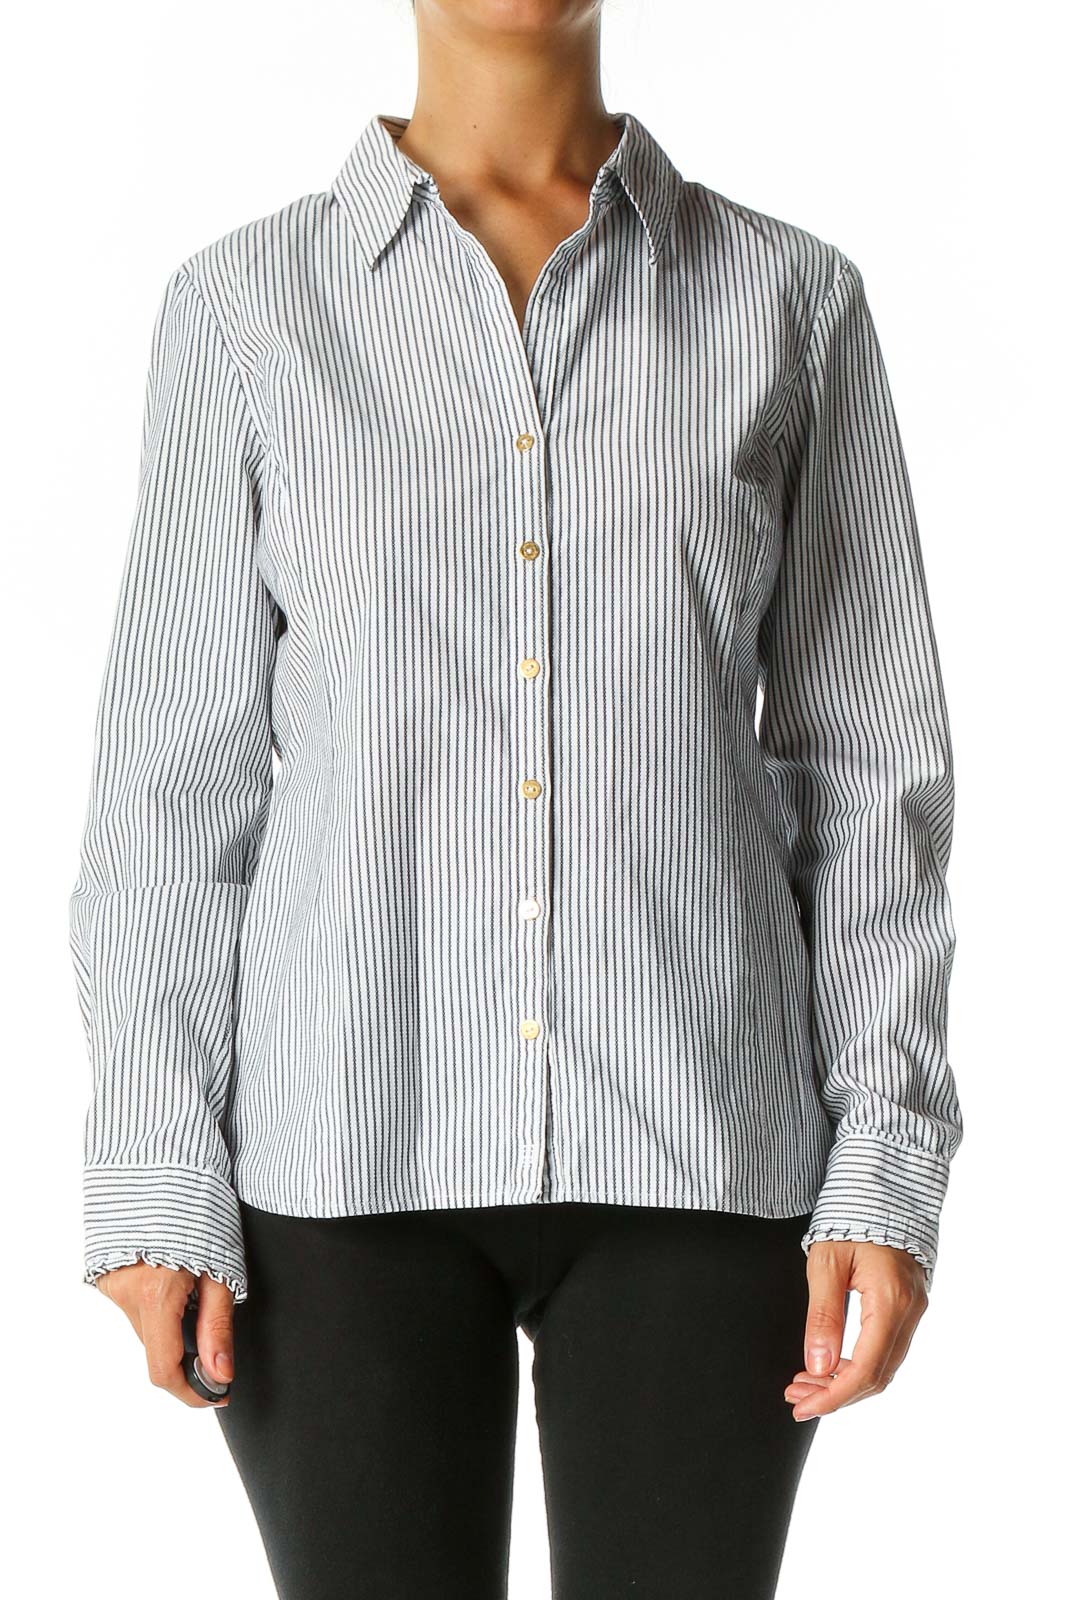 White Striped All Day Wear Shirt Front